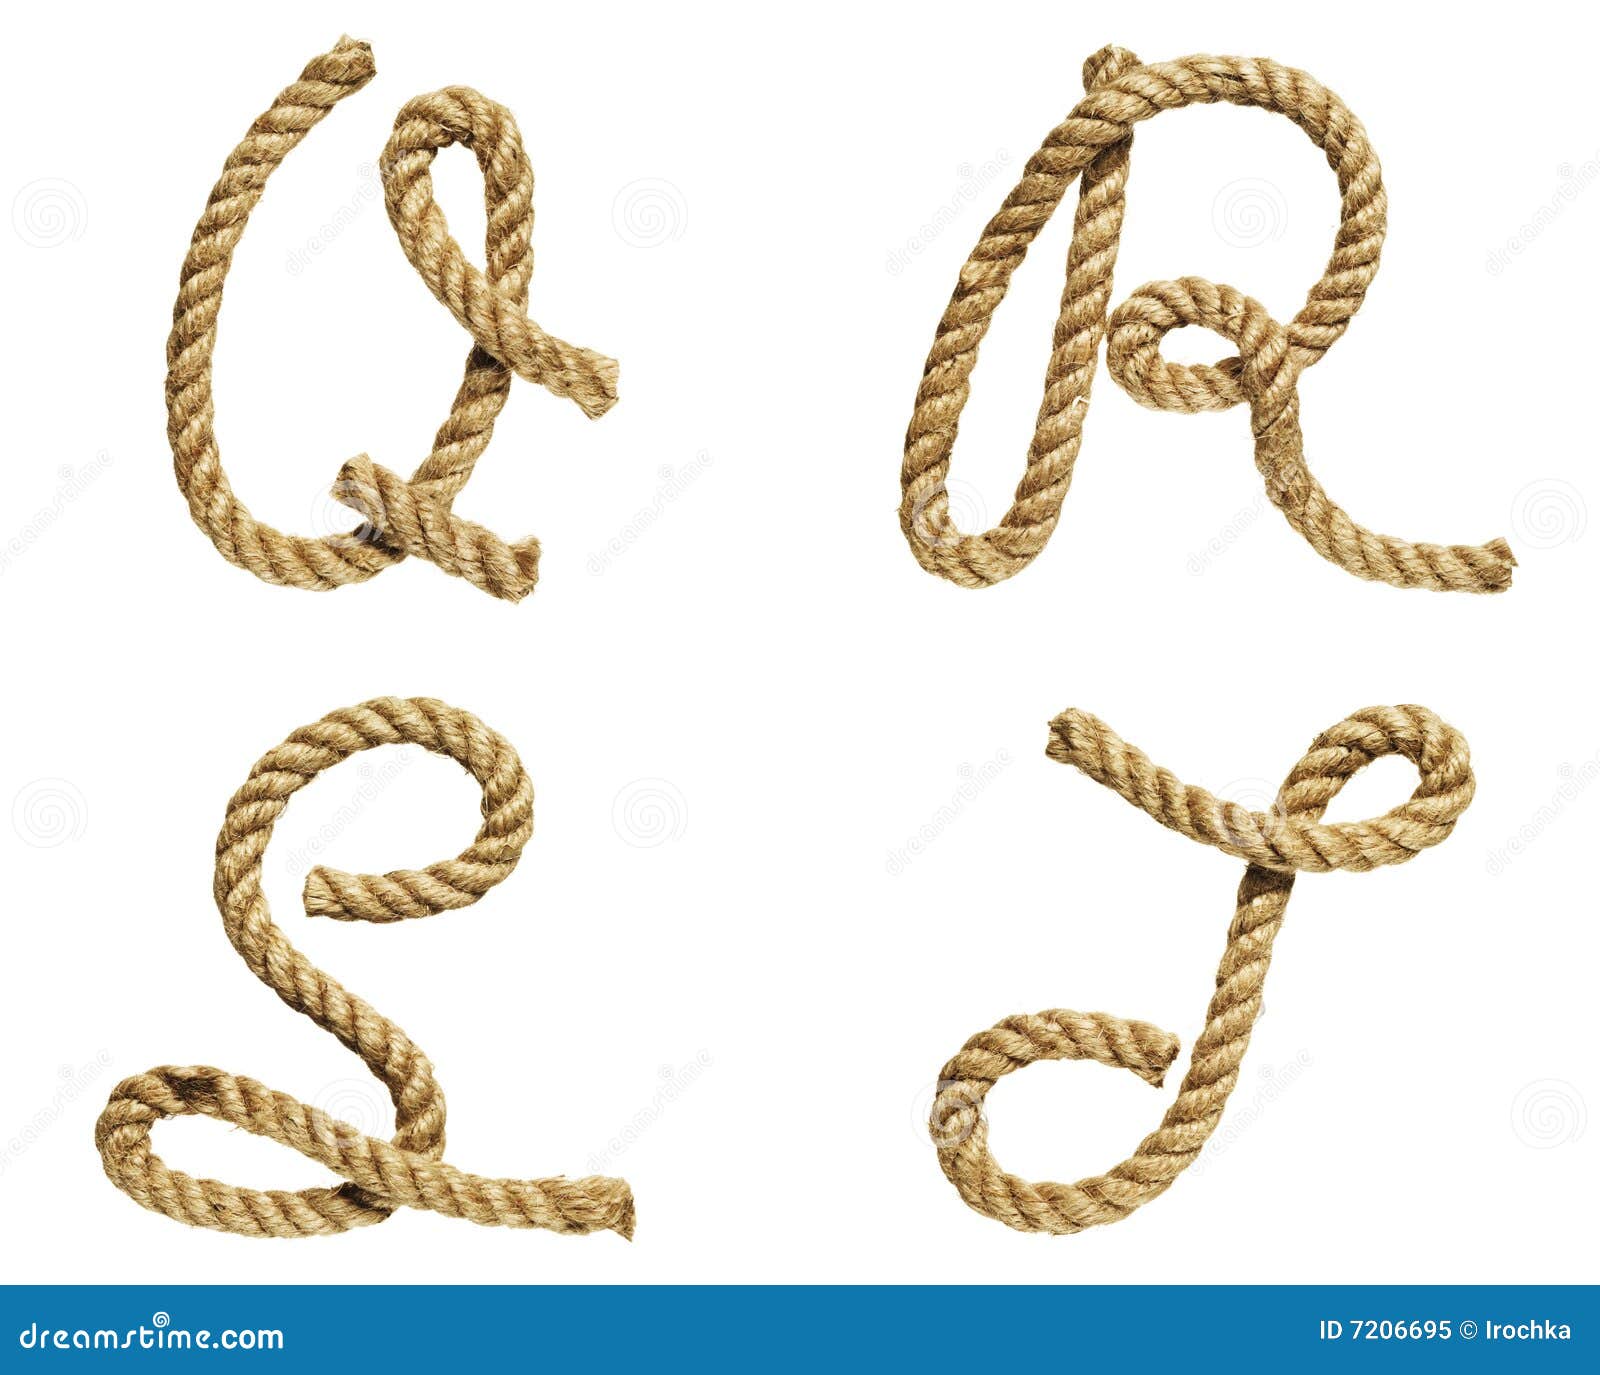 rope forming letter a, b, c, d